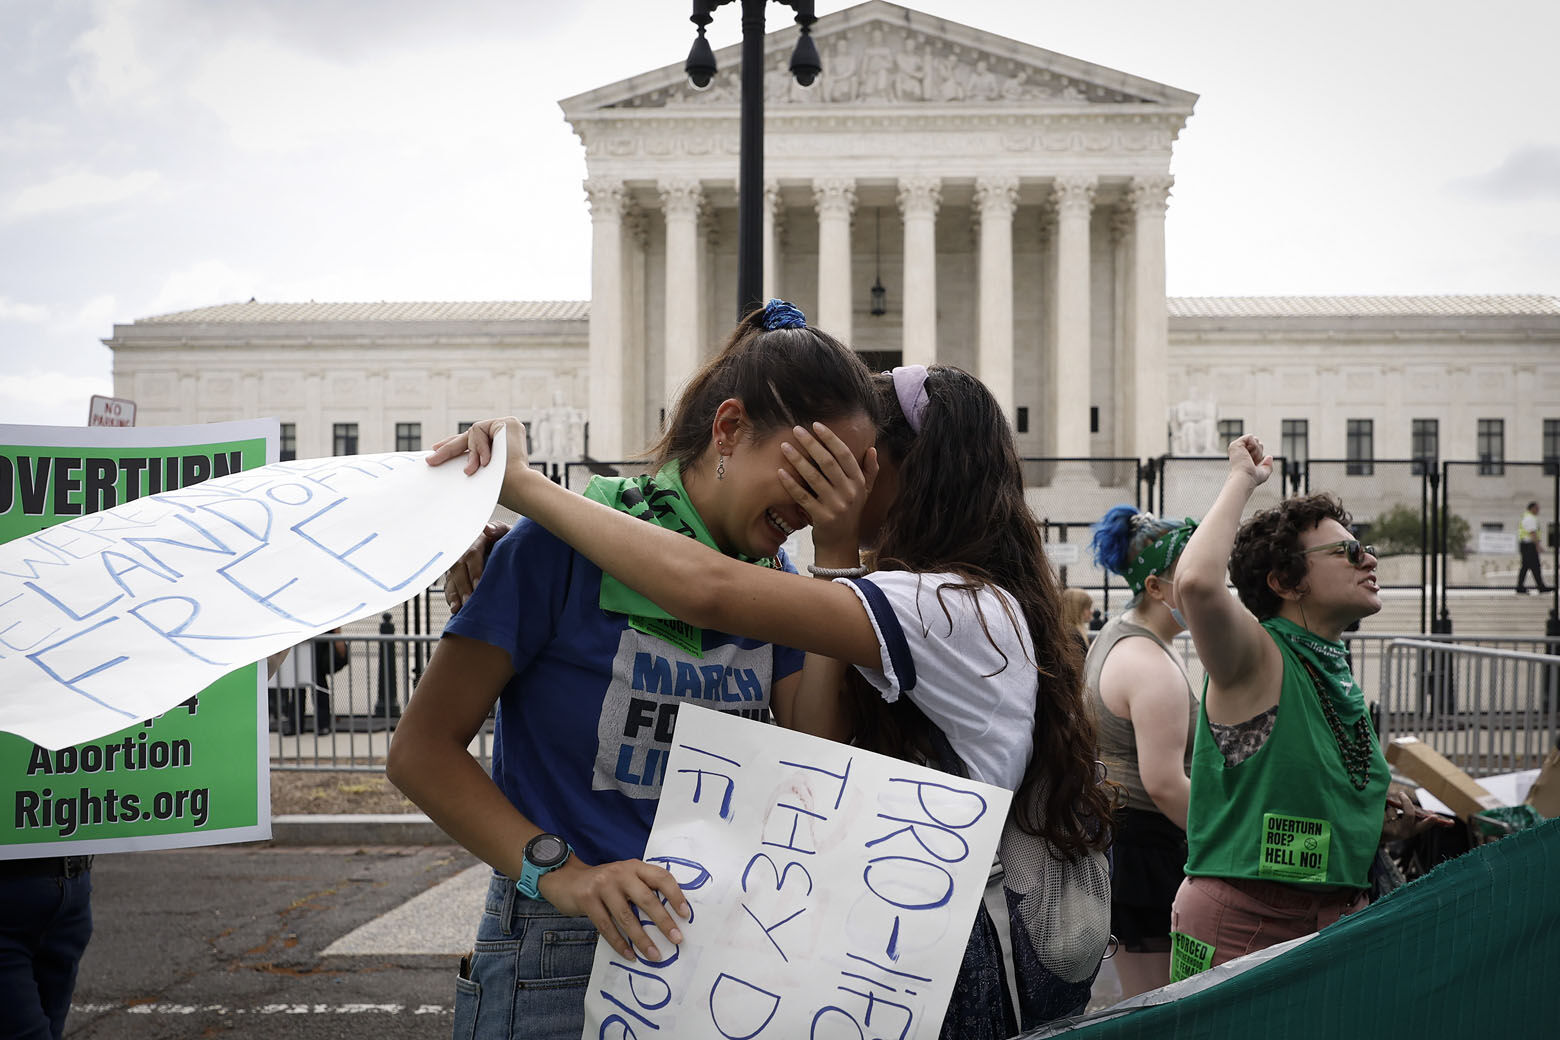 <p>Pro-life activists react to the Dobbs v Jackson Women’s Health Organization ruling which overturns the landmark abortion Roe v. Wade case in front of the U.S. Supreme Court on June 24, 2022 in Washington, DC. (Photo by Anna Moneymaker/Getty Images)</p>
